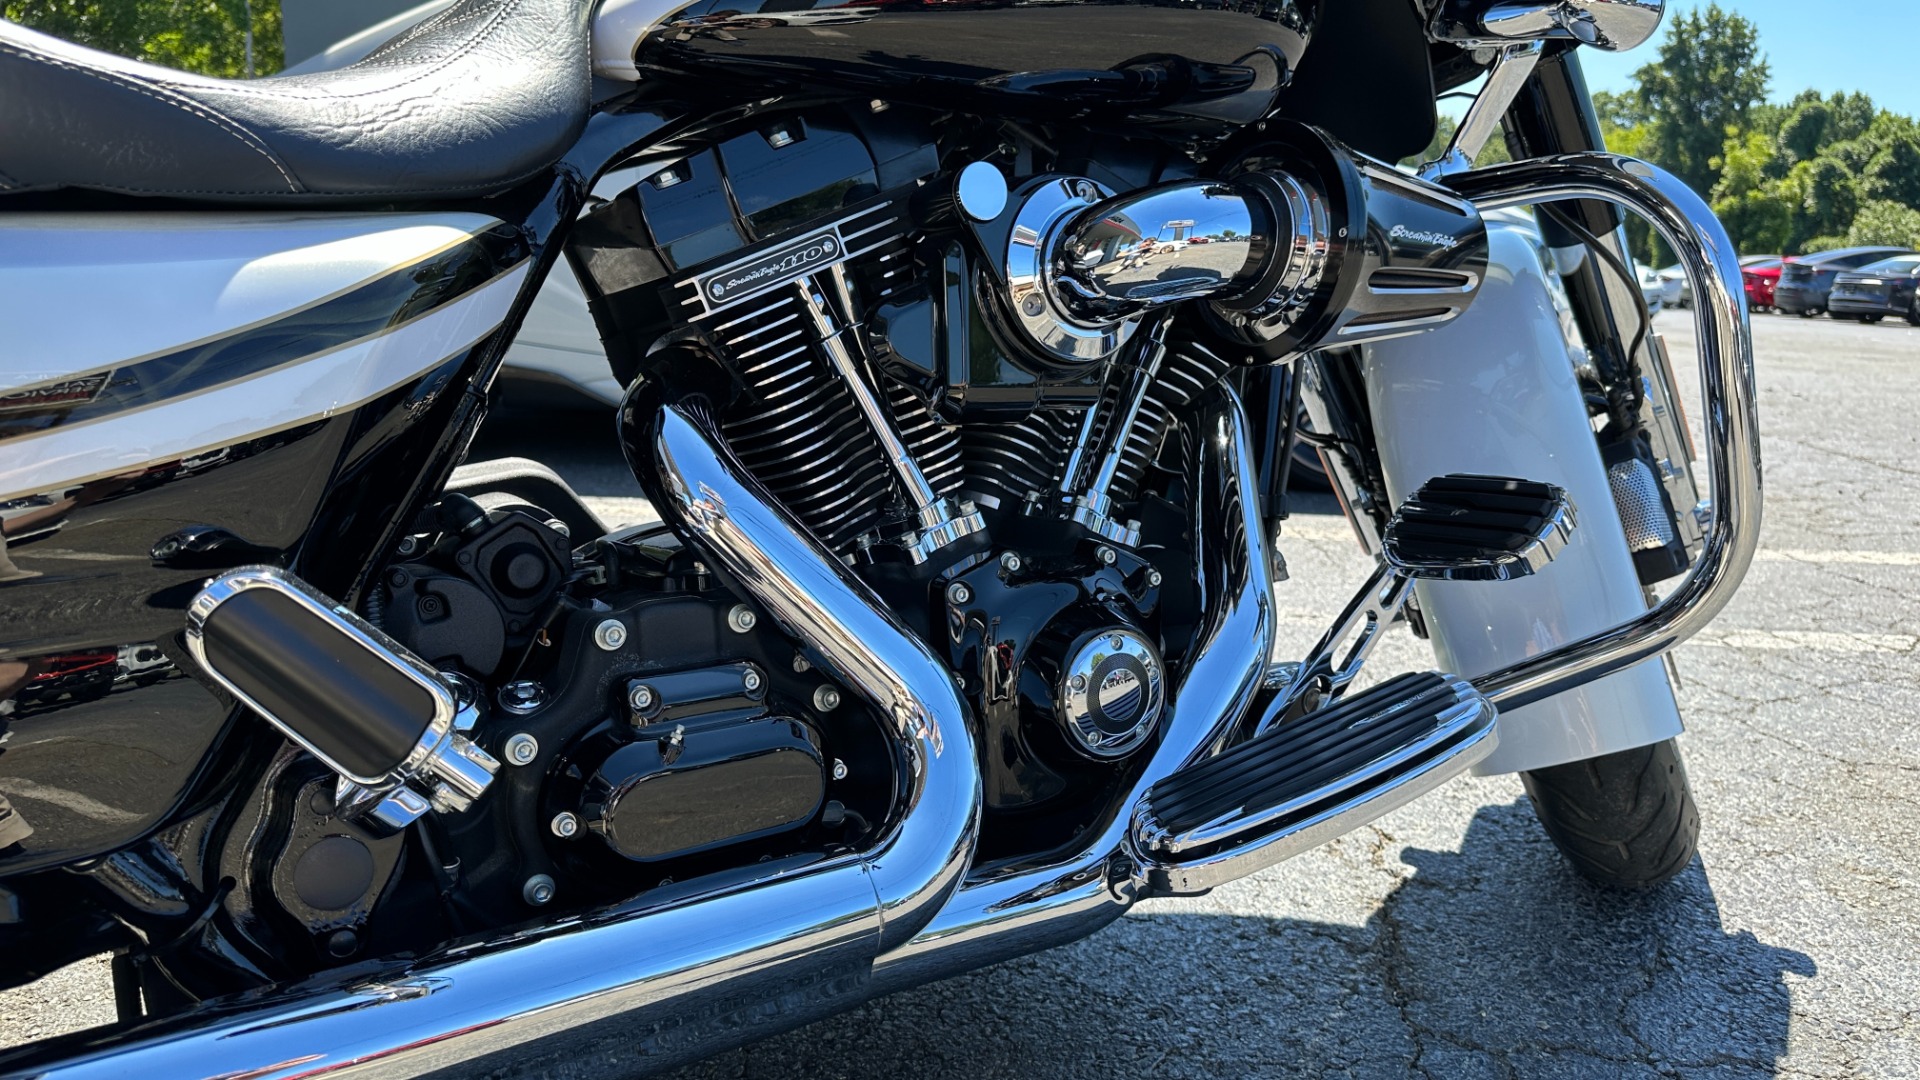 Used 2012 Harley Davidson FLTRXSE CVO Road Glide Custom CVO PAINT / RINEHART EXHAUST / SCREAMING EAGLE 110 ENGINE for sale $32,000 at Formula Imports in Charlotte NC 28227 24